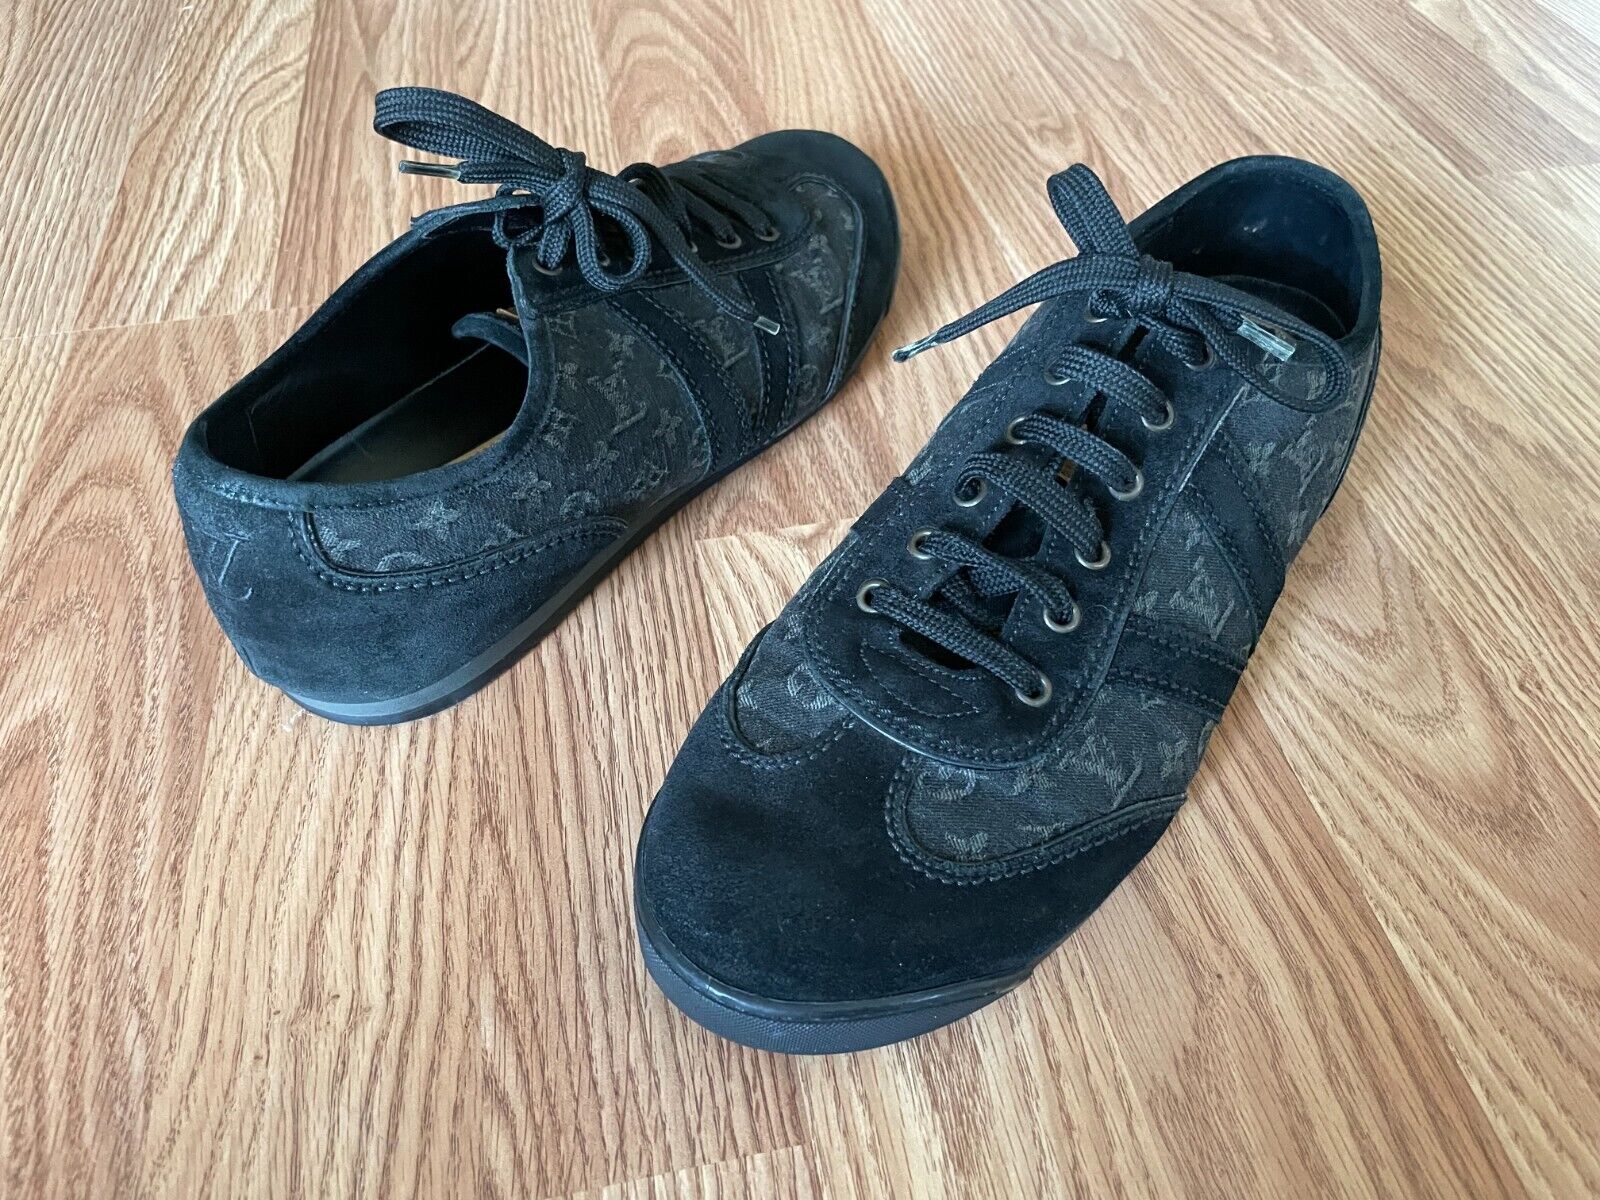 Louis Vuitton Men Shoes Sneaker Lace Up in Italy Size 9 Read | eBay